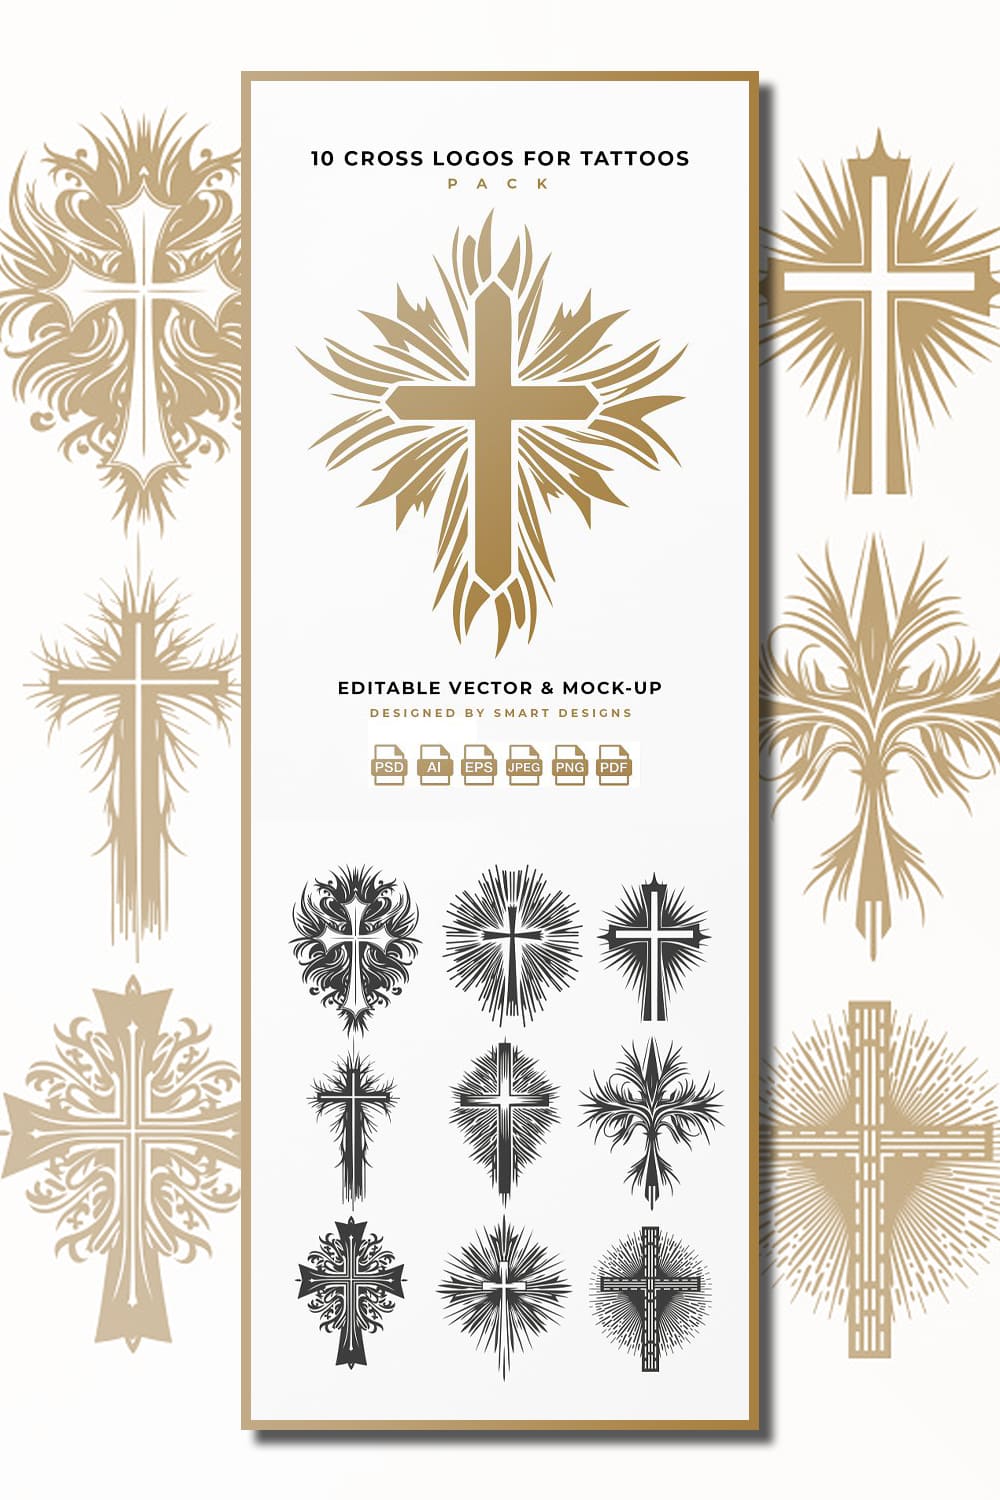 Black and gold crosses are depicted on a white background.